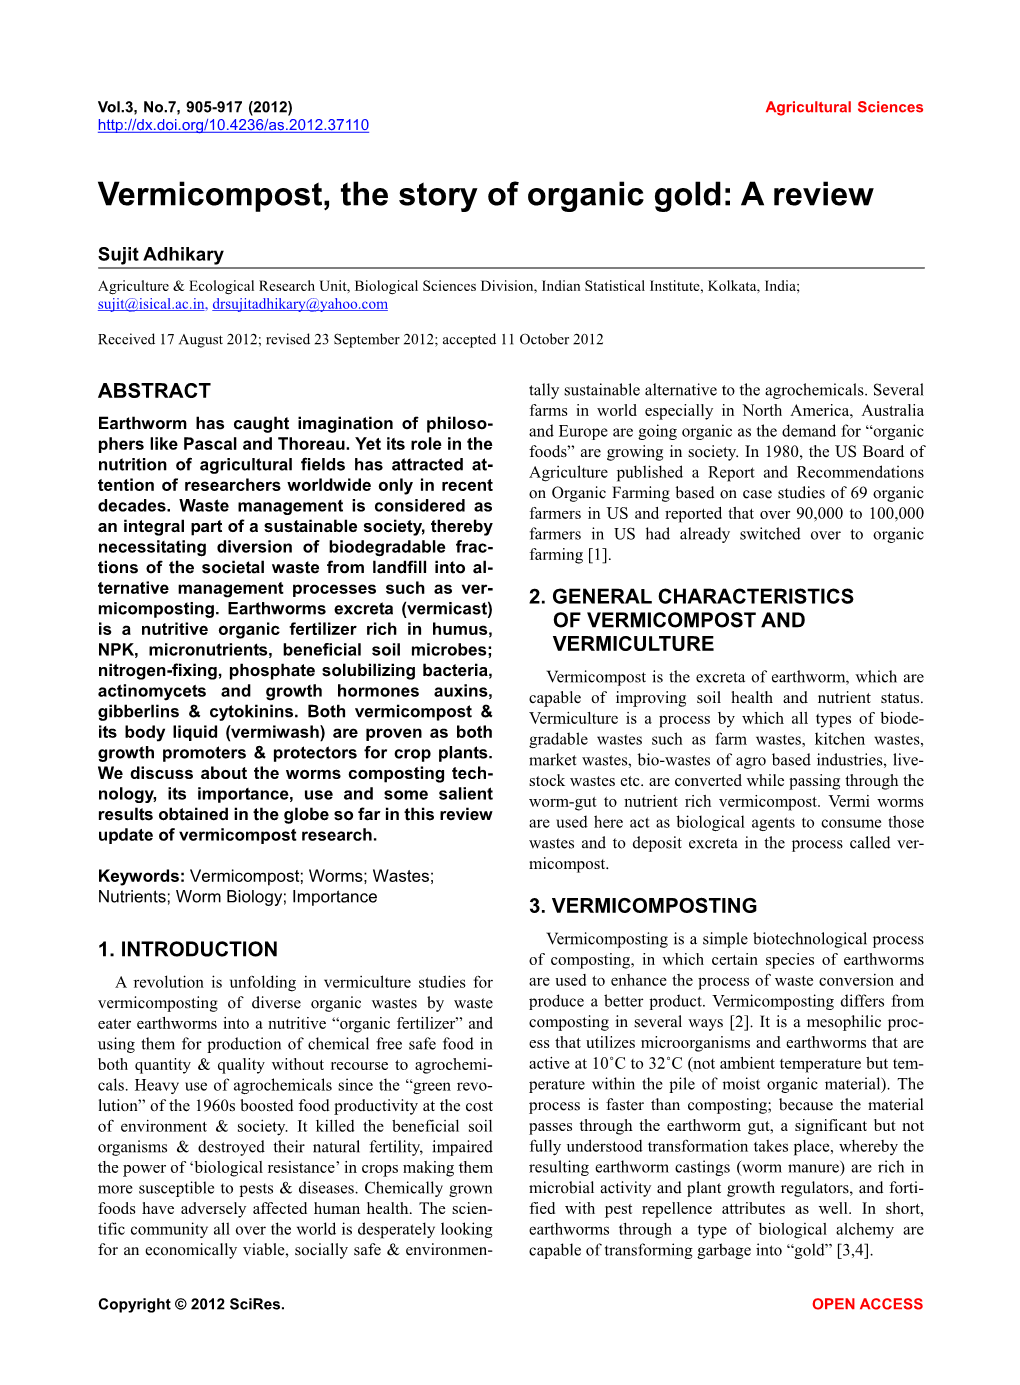 Vermicompost, the Story of Organic Gold: a Review